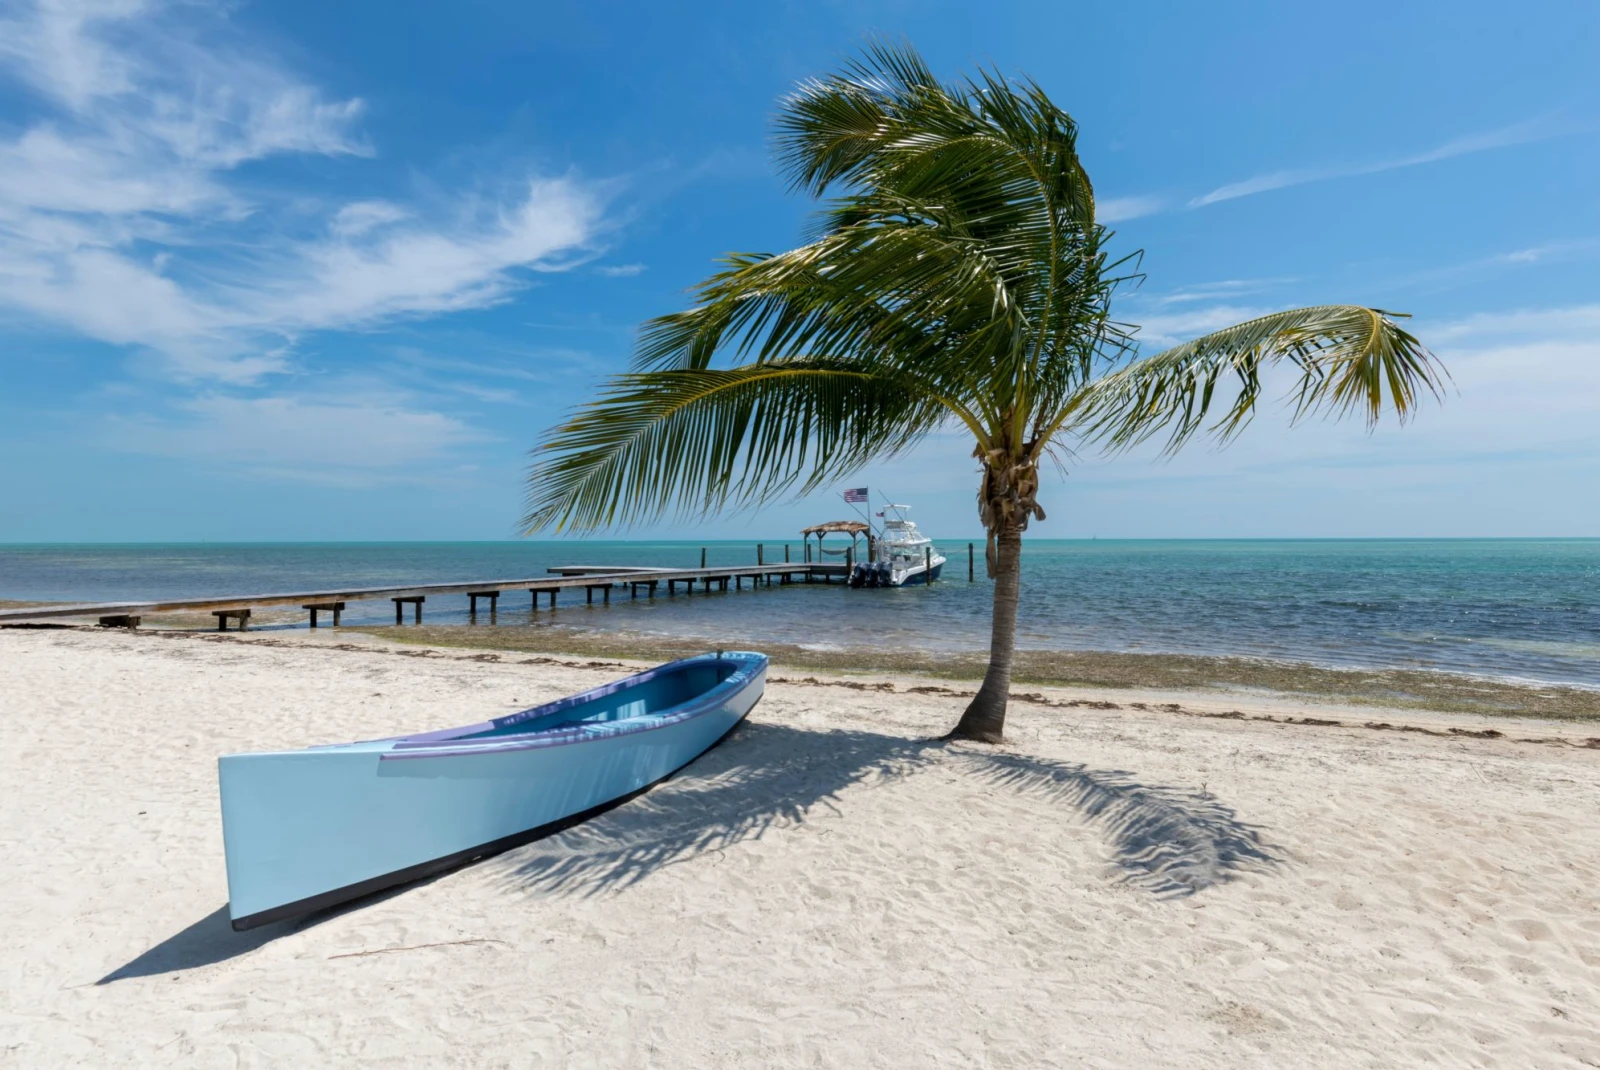 a beach with a palm tree, boardwalk dock and blue boat on white sand